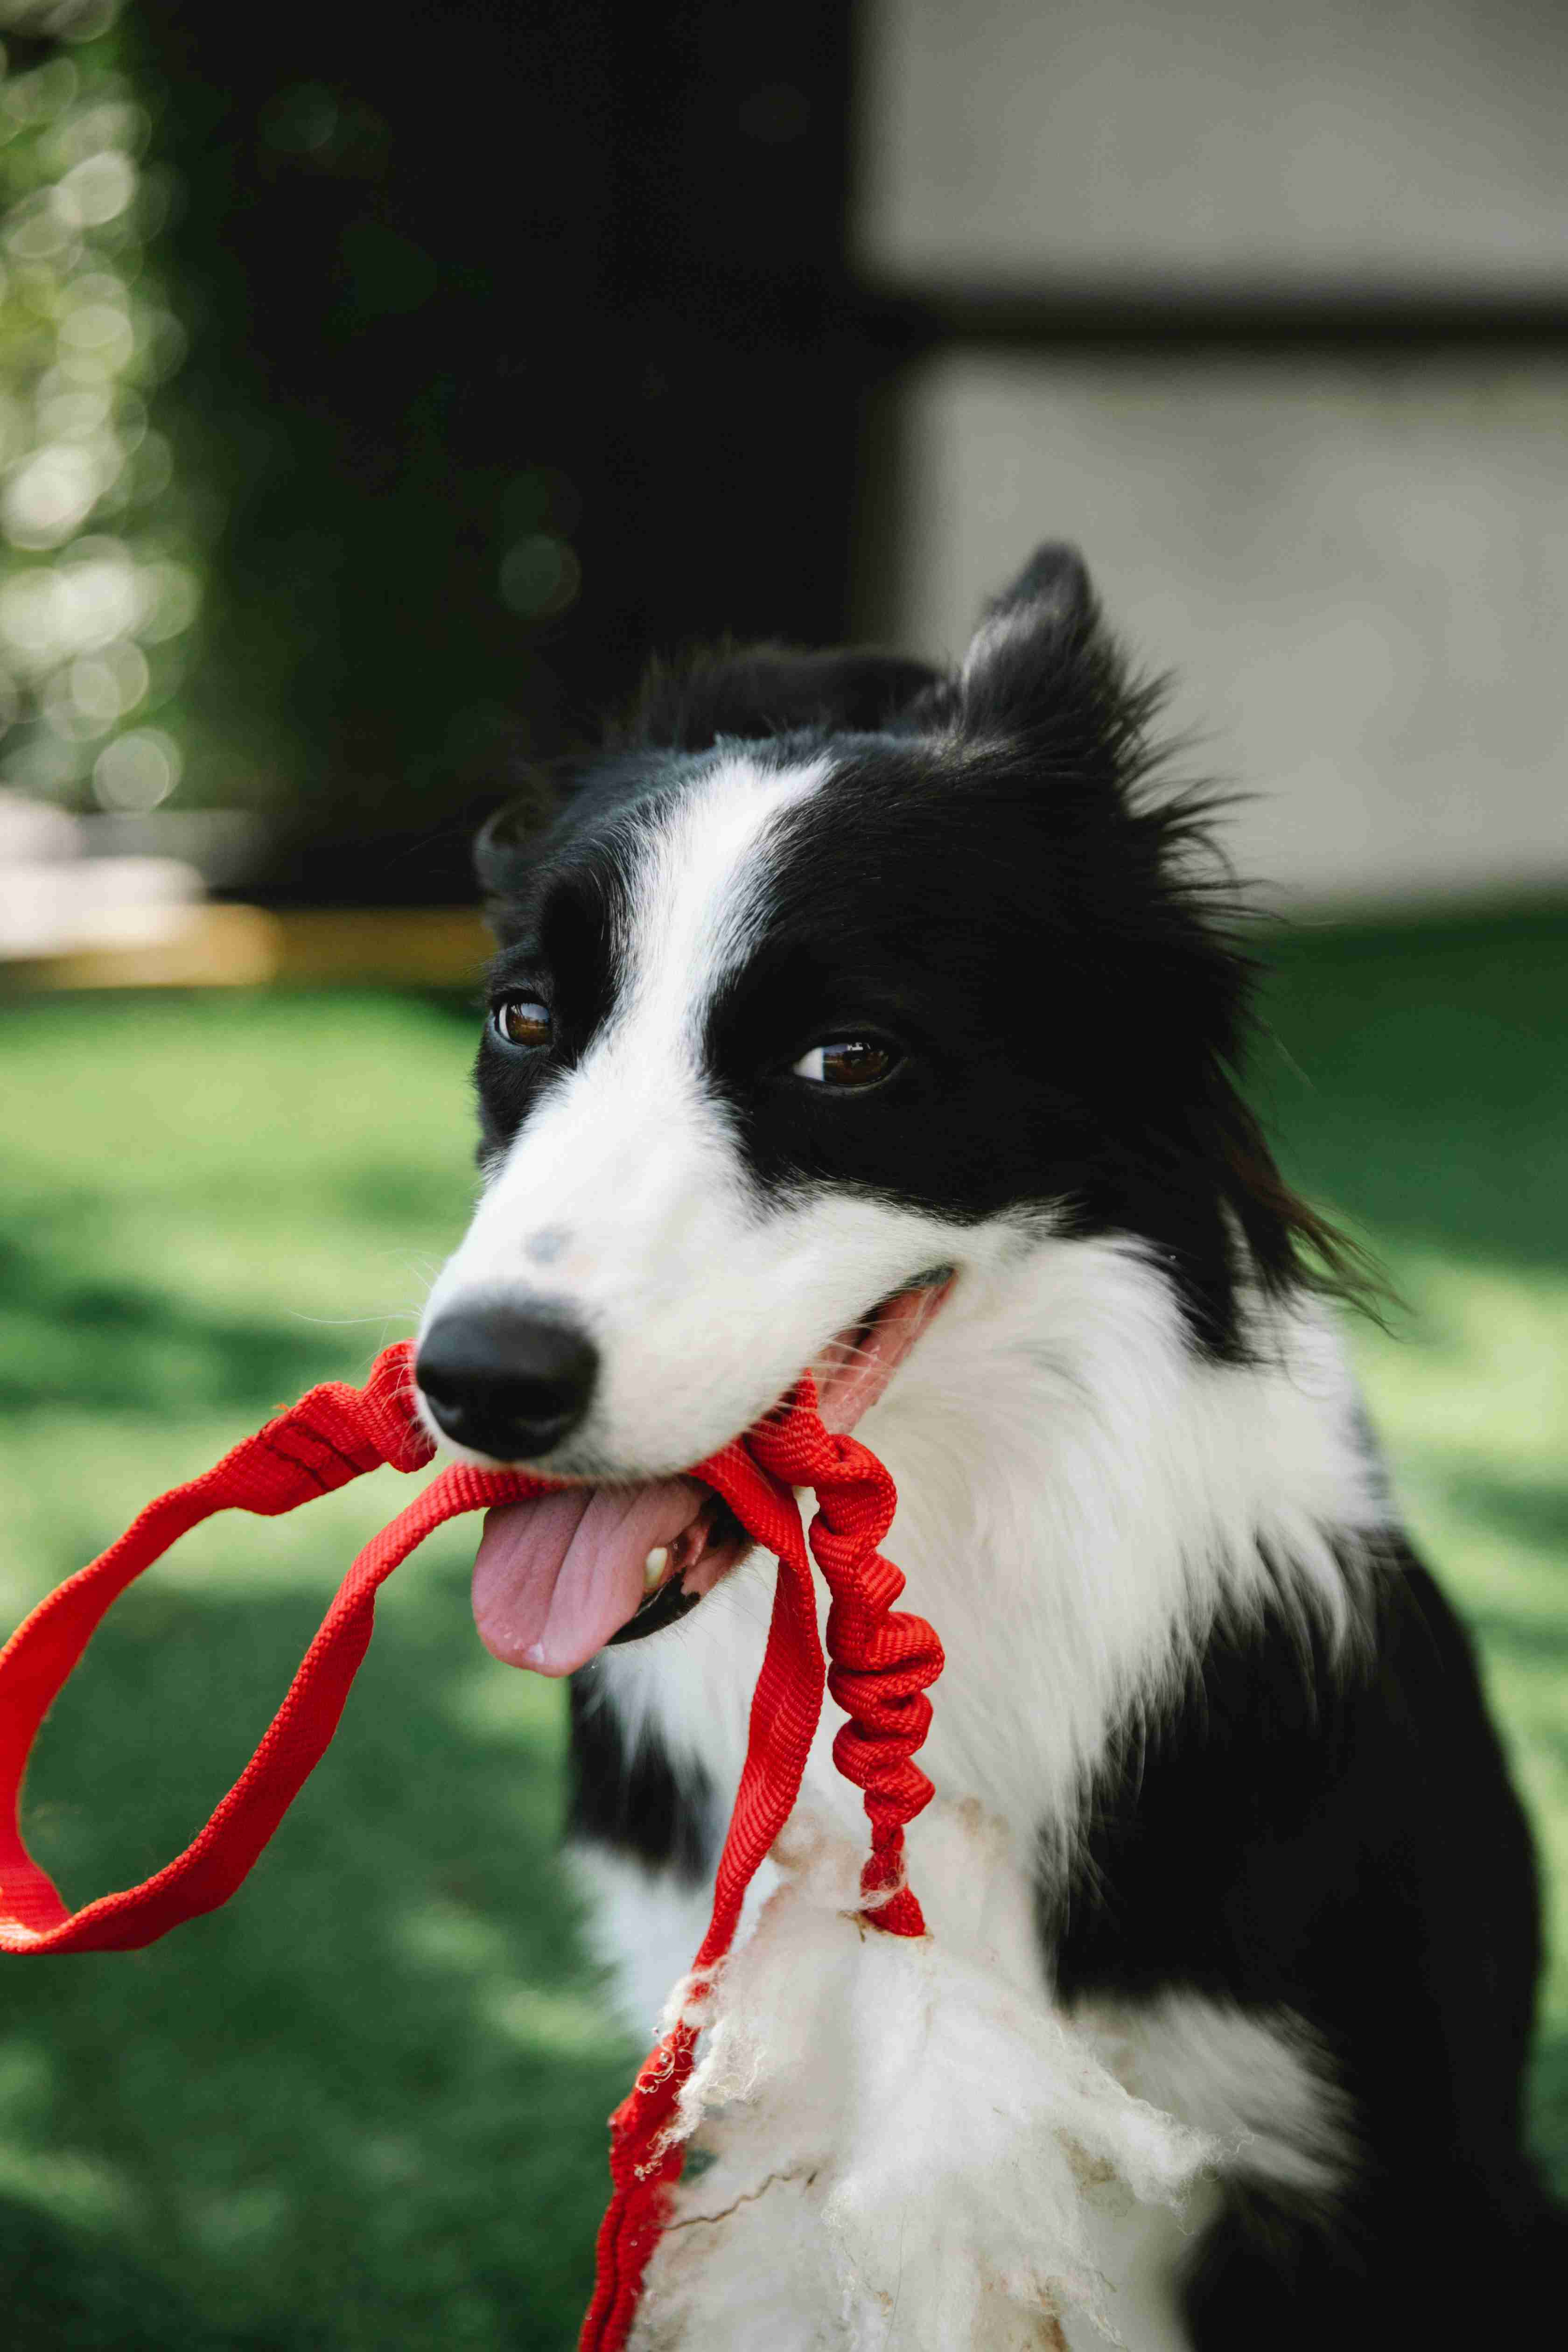 Is Your Border Collie Exhibiting These Signs of a Urinary Tract Infection? Learn How to Spot UTI Symptoms in Your Furry Friend